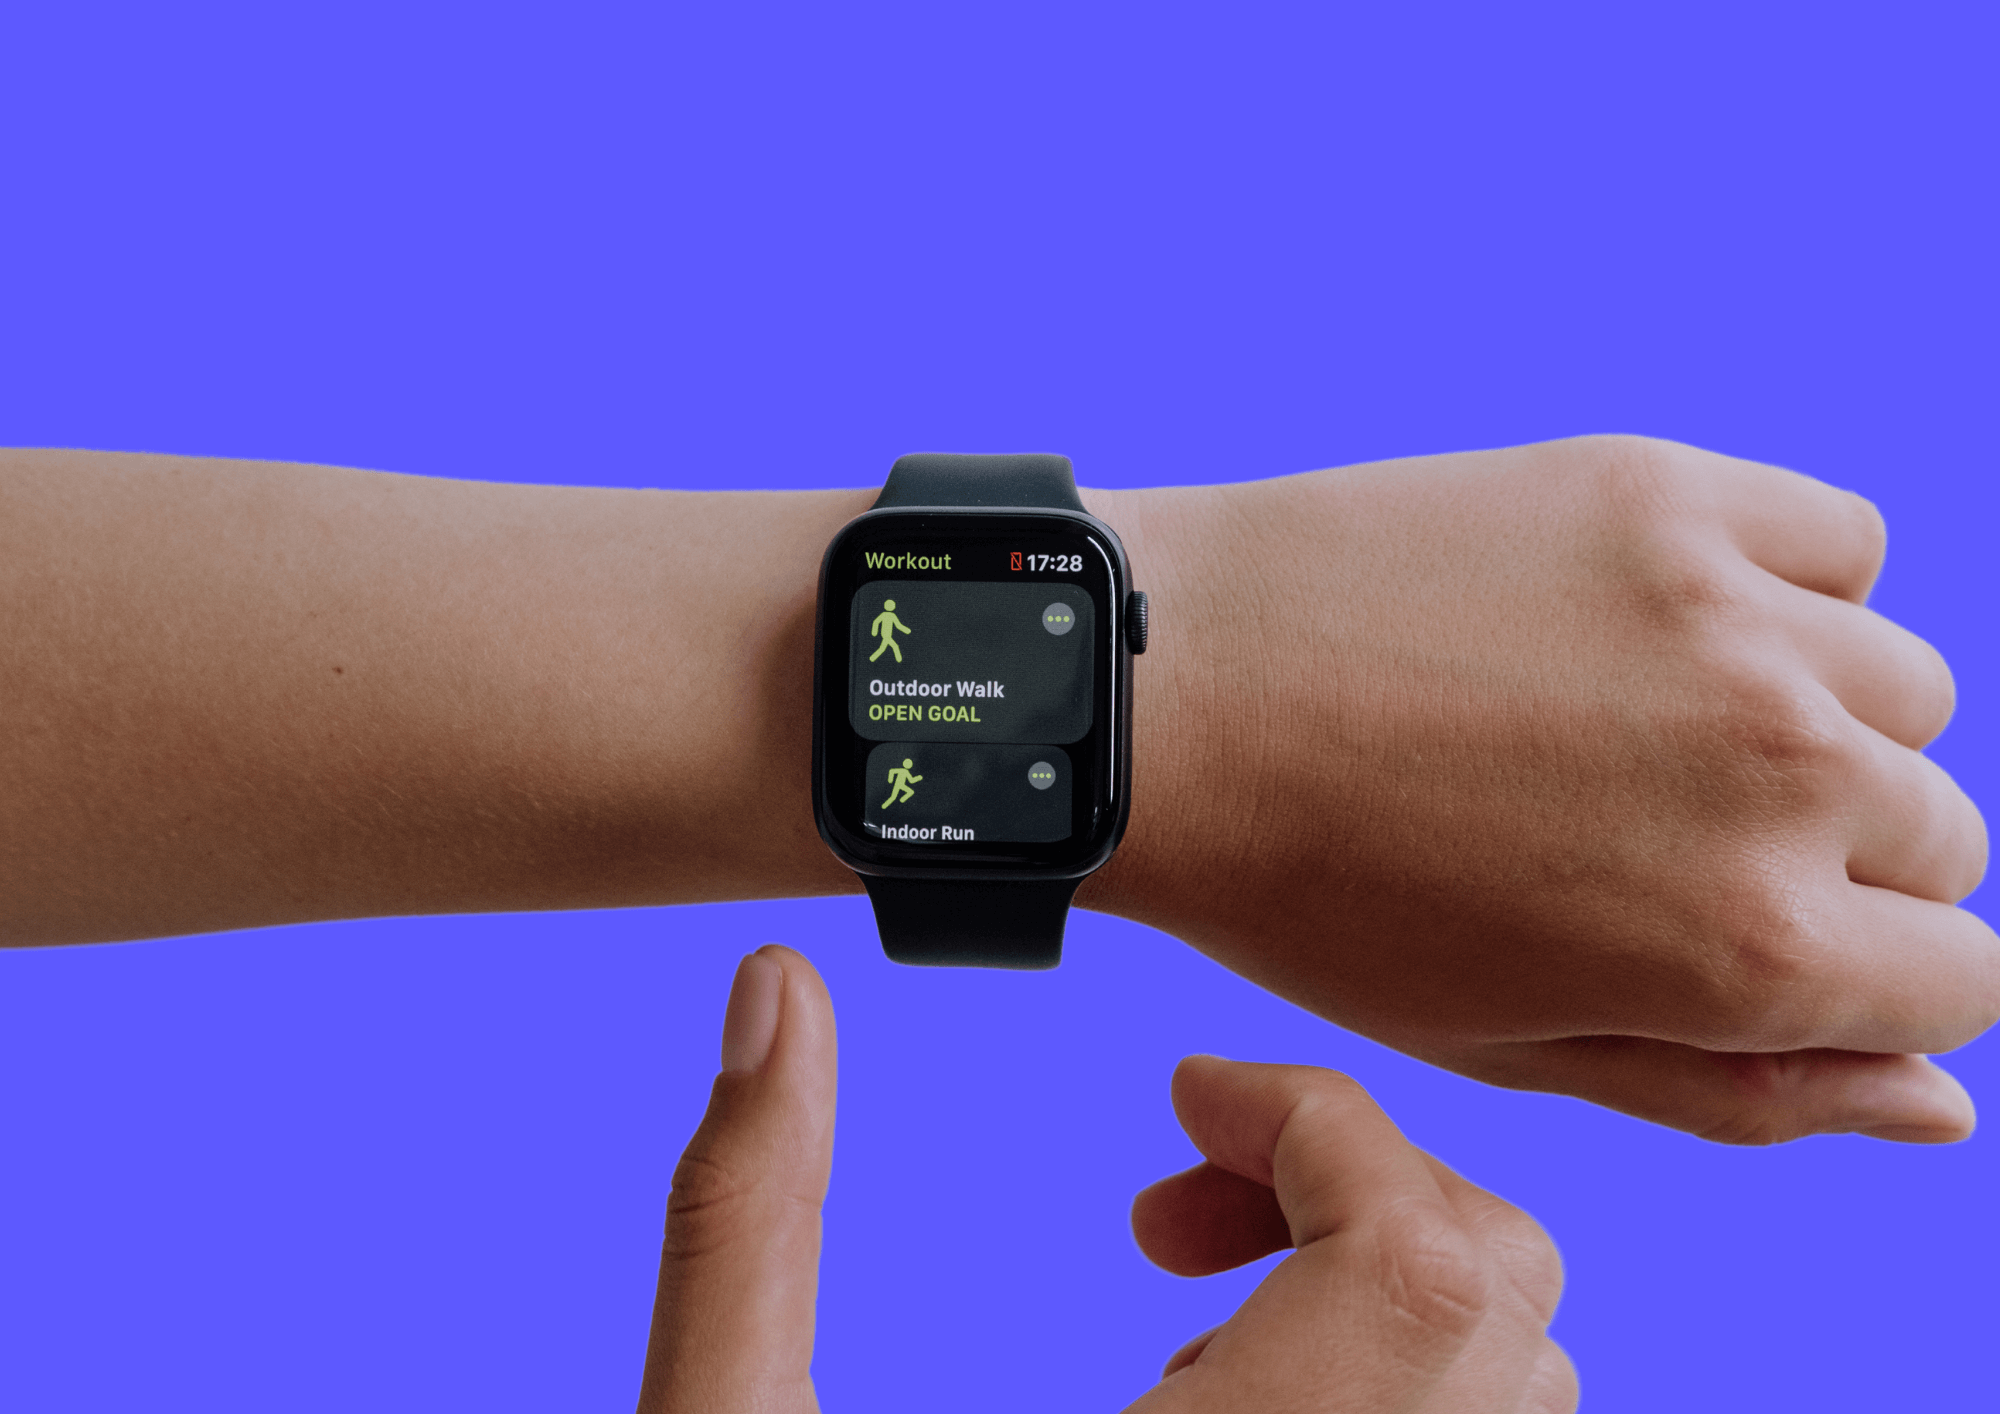 SmartWatch with workout plan on a person's wrist.